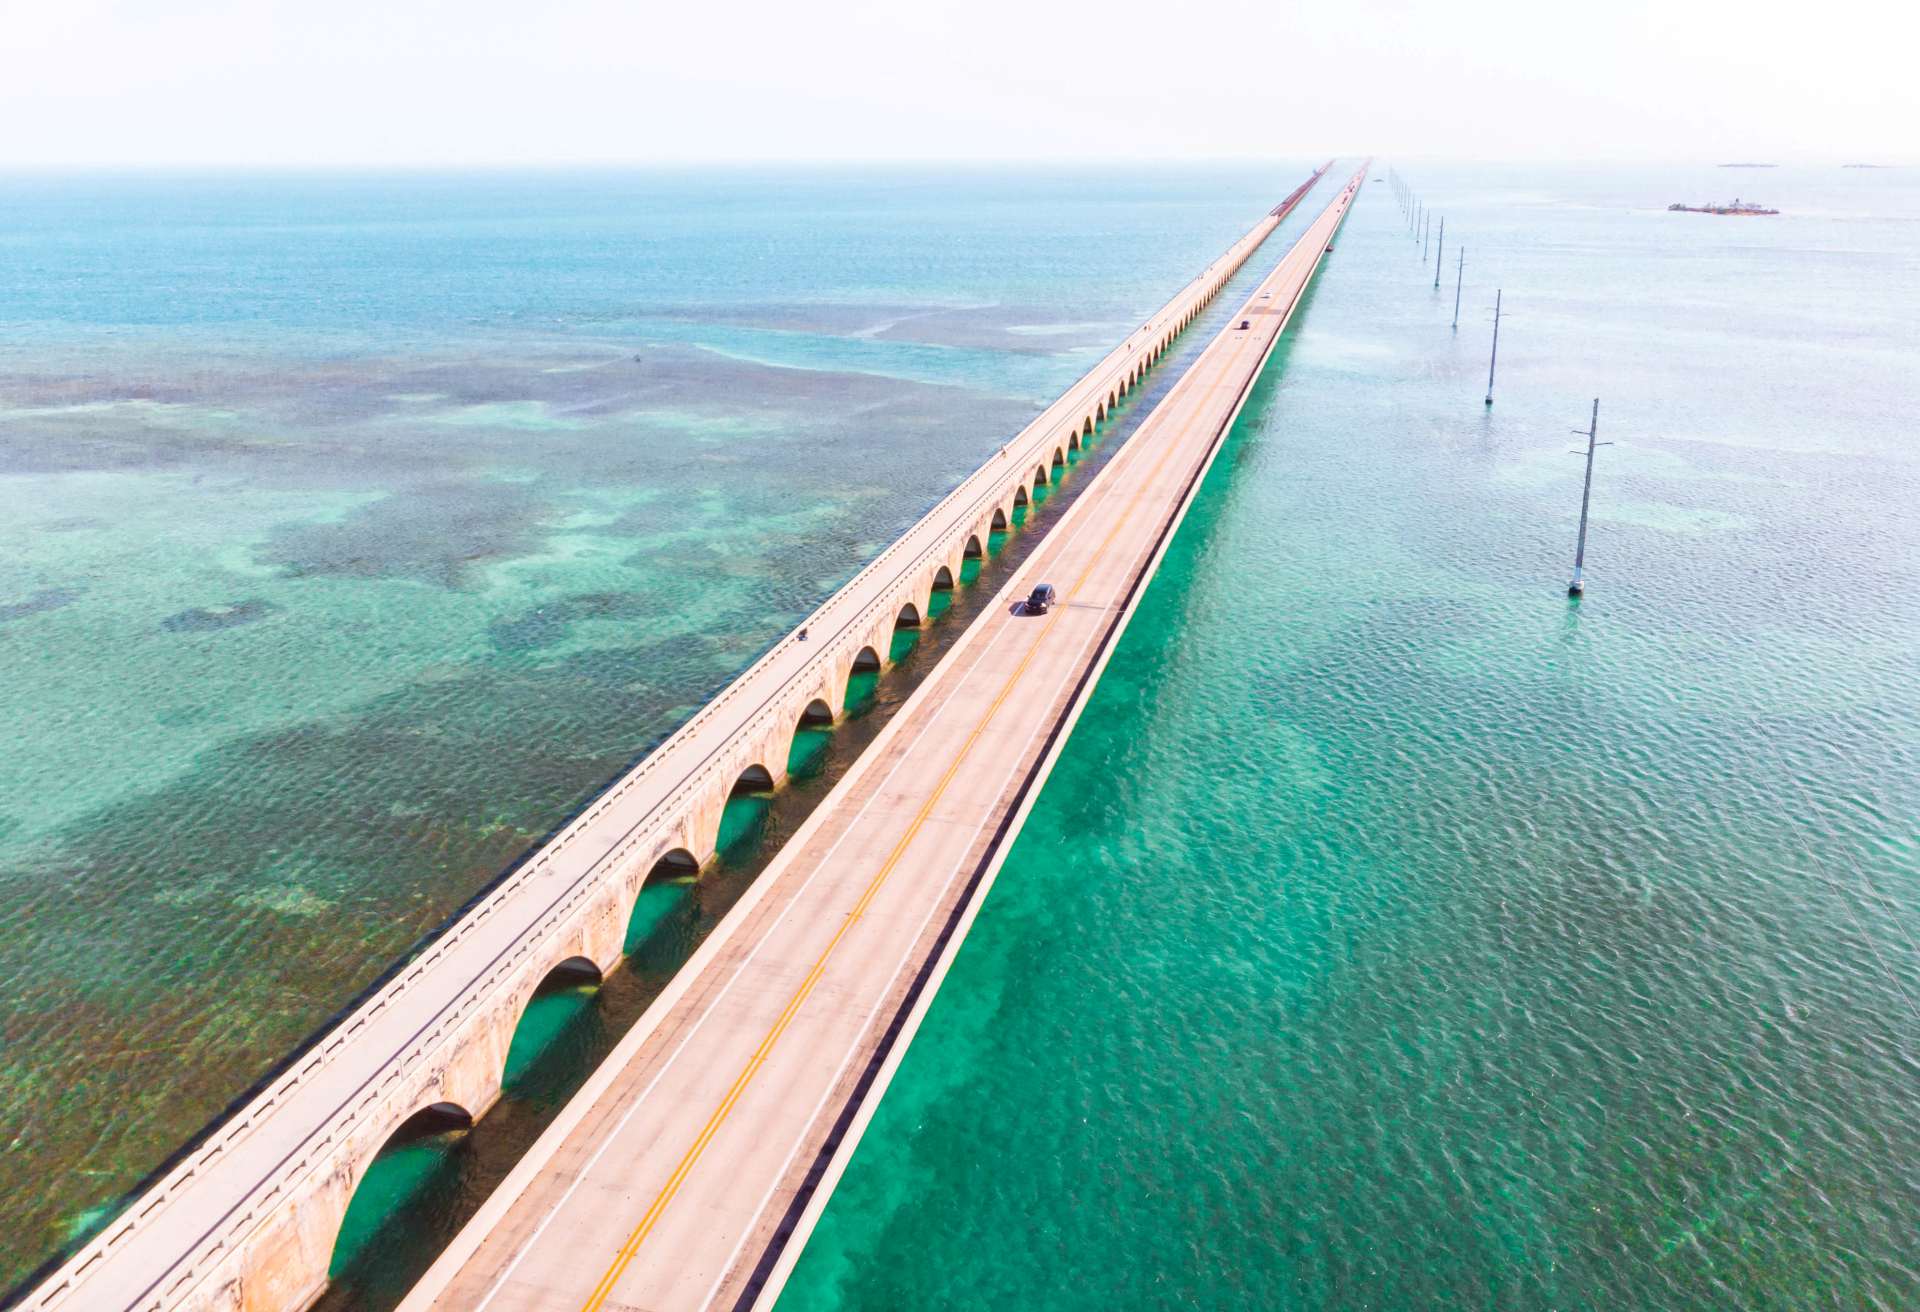 Drone view of the Overseas Highway in Florida Keys with turquoise color and infinite road.